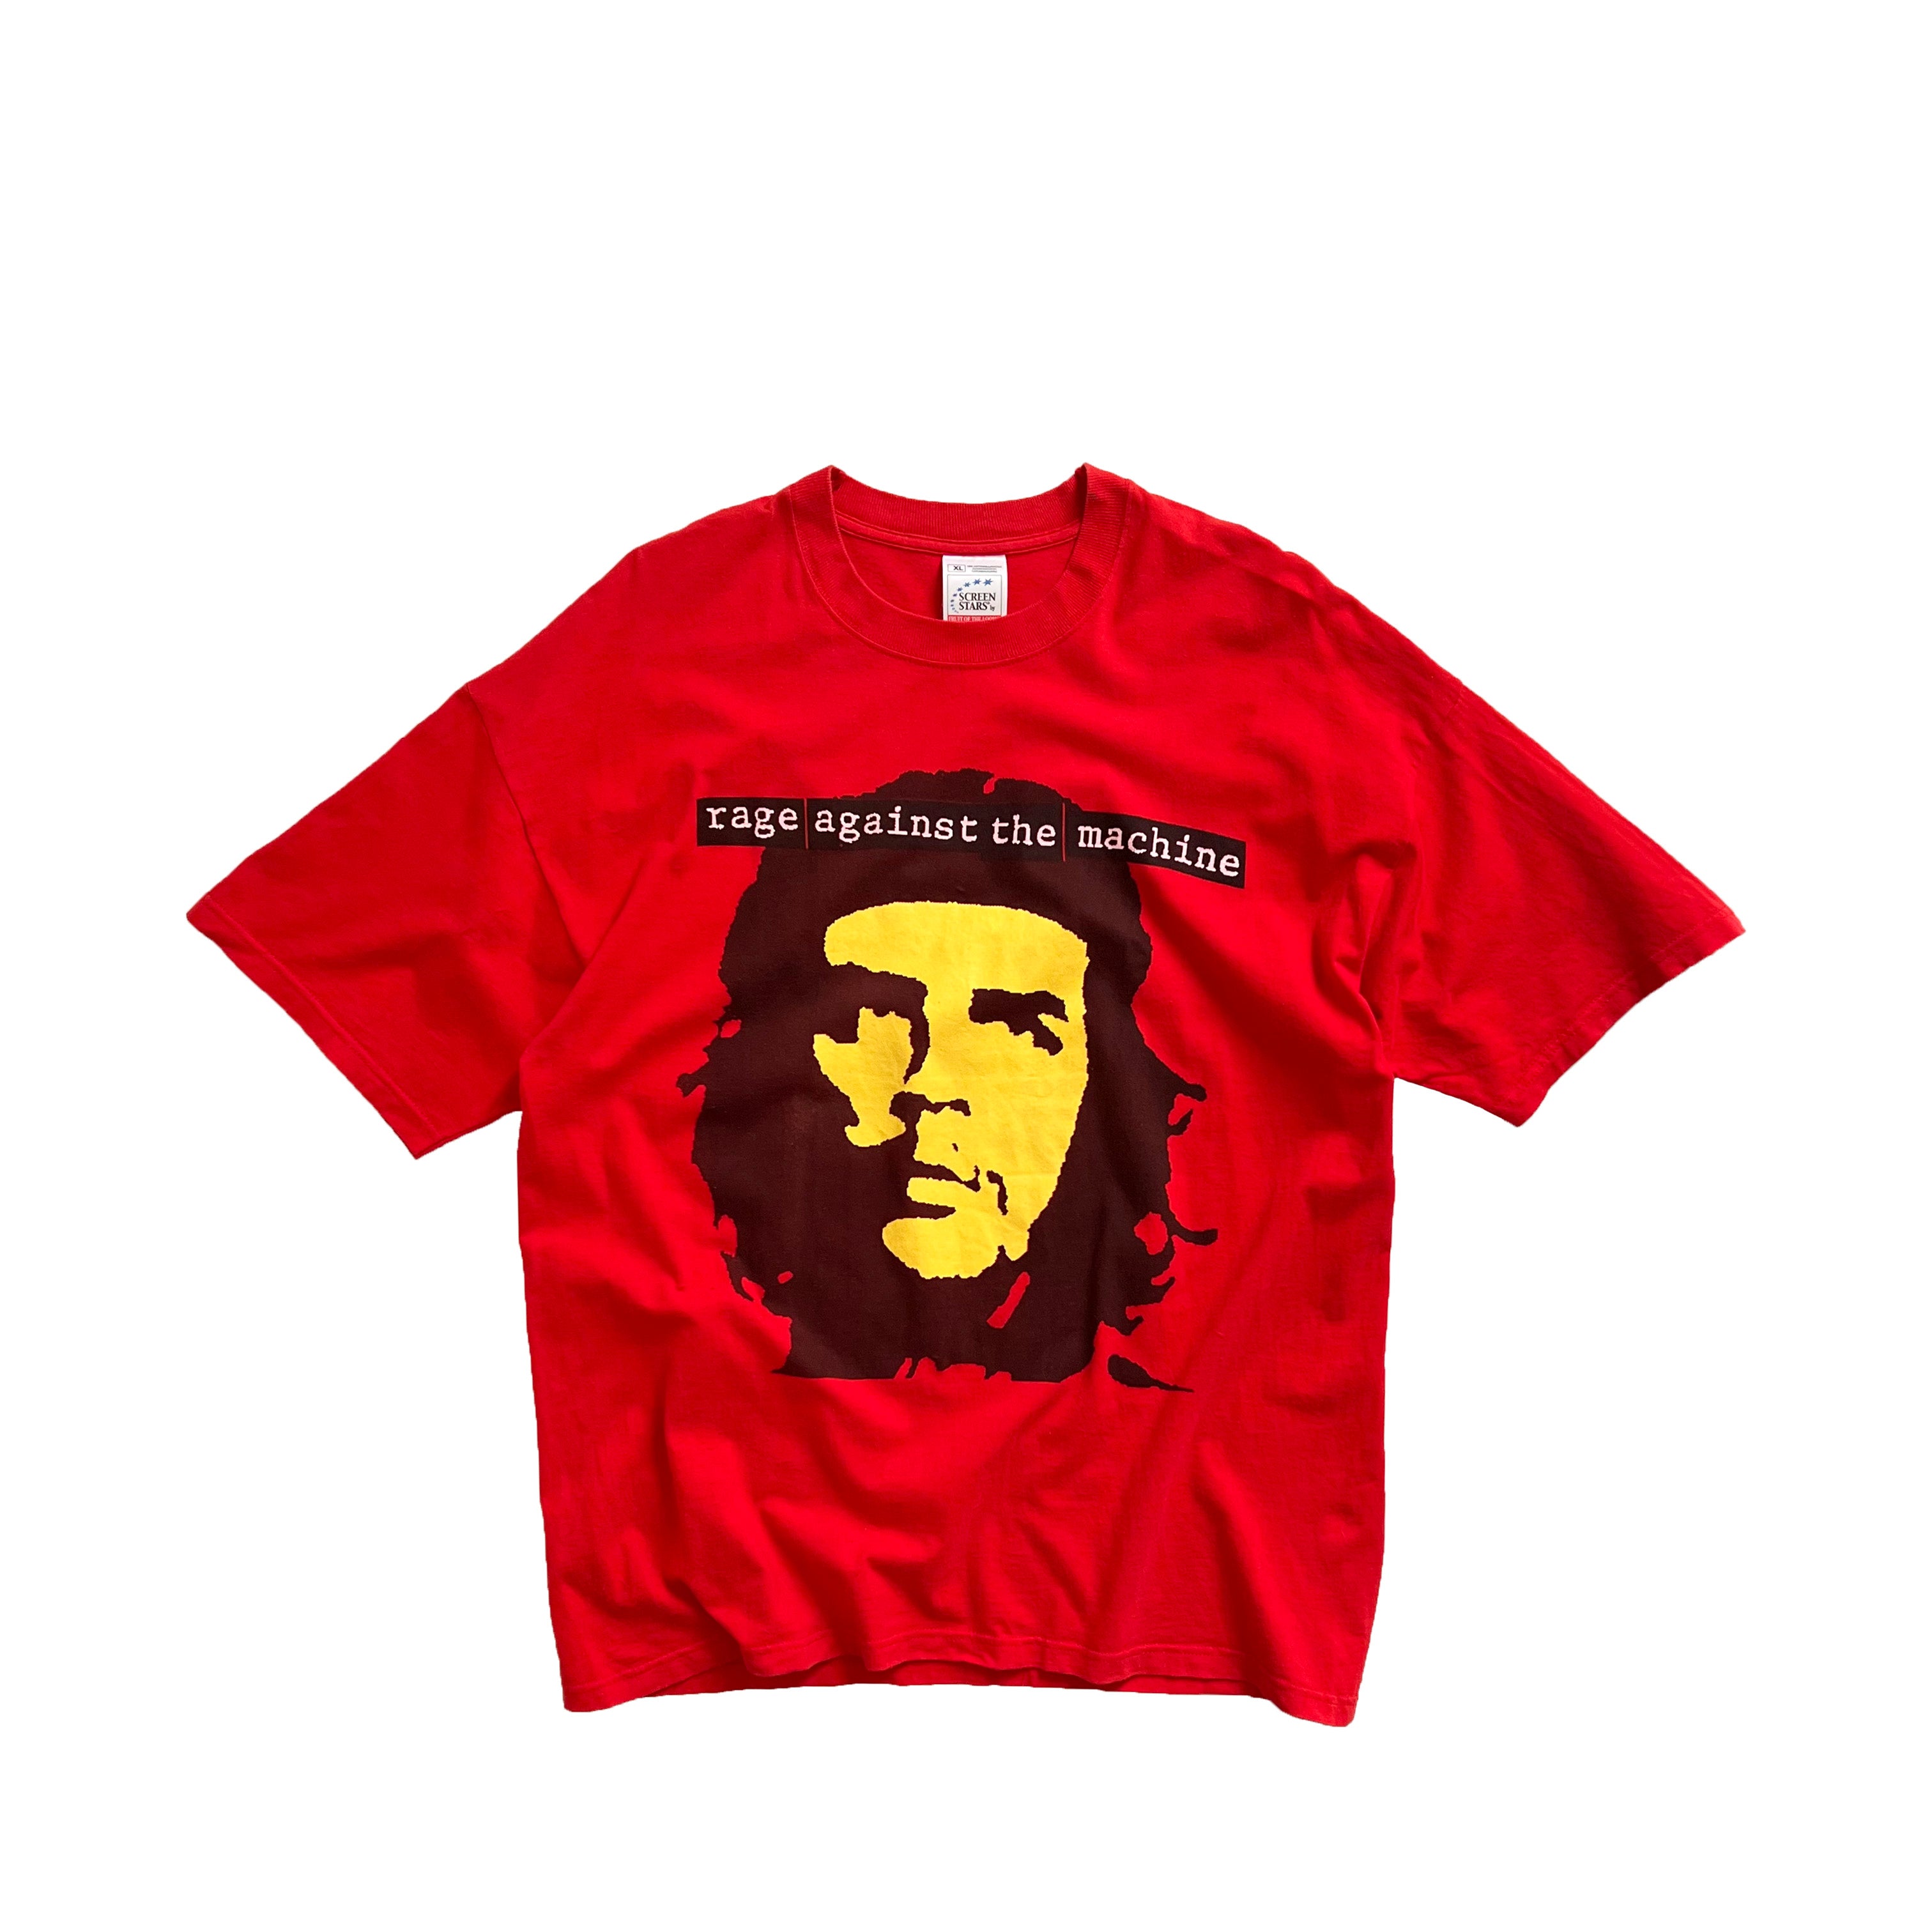 Rage against the machine ヴィンテージ tシャツレイジ - Tシャツ 